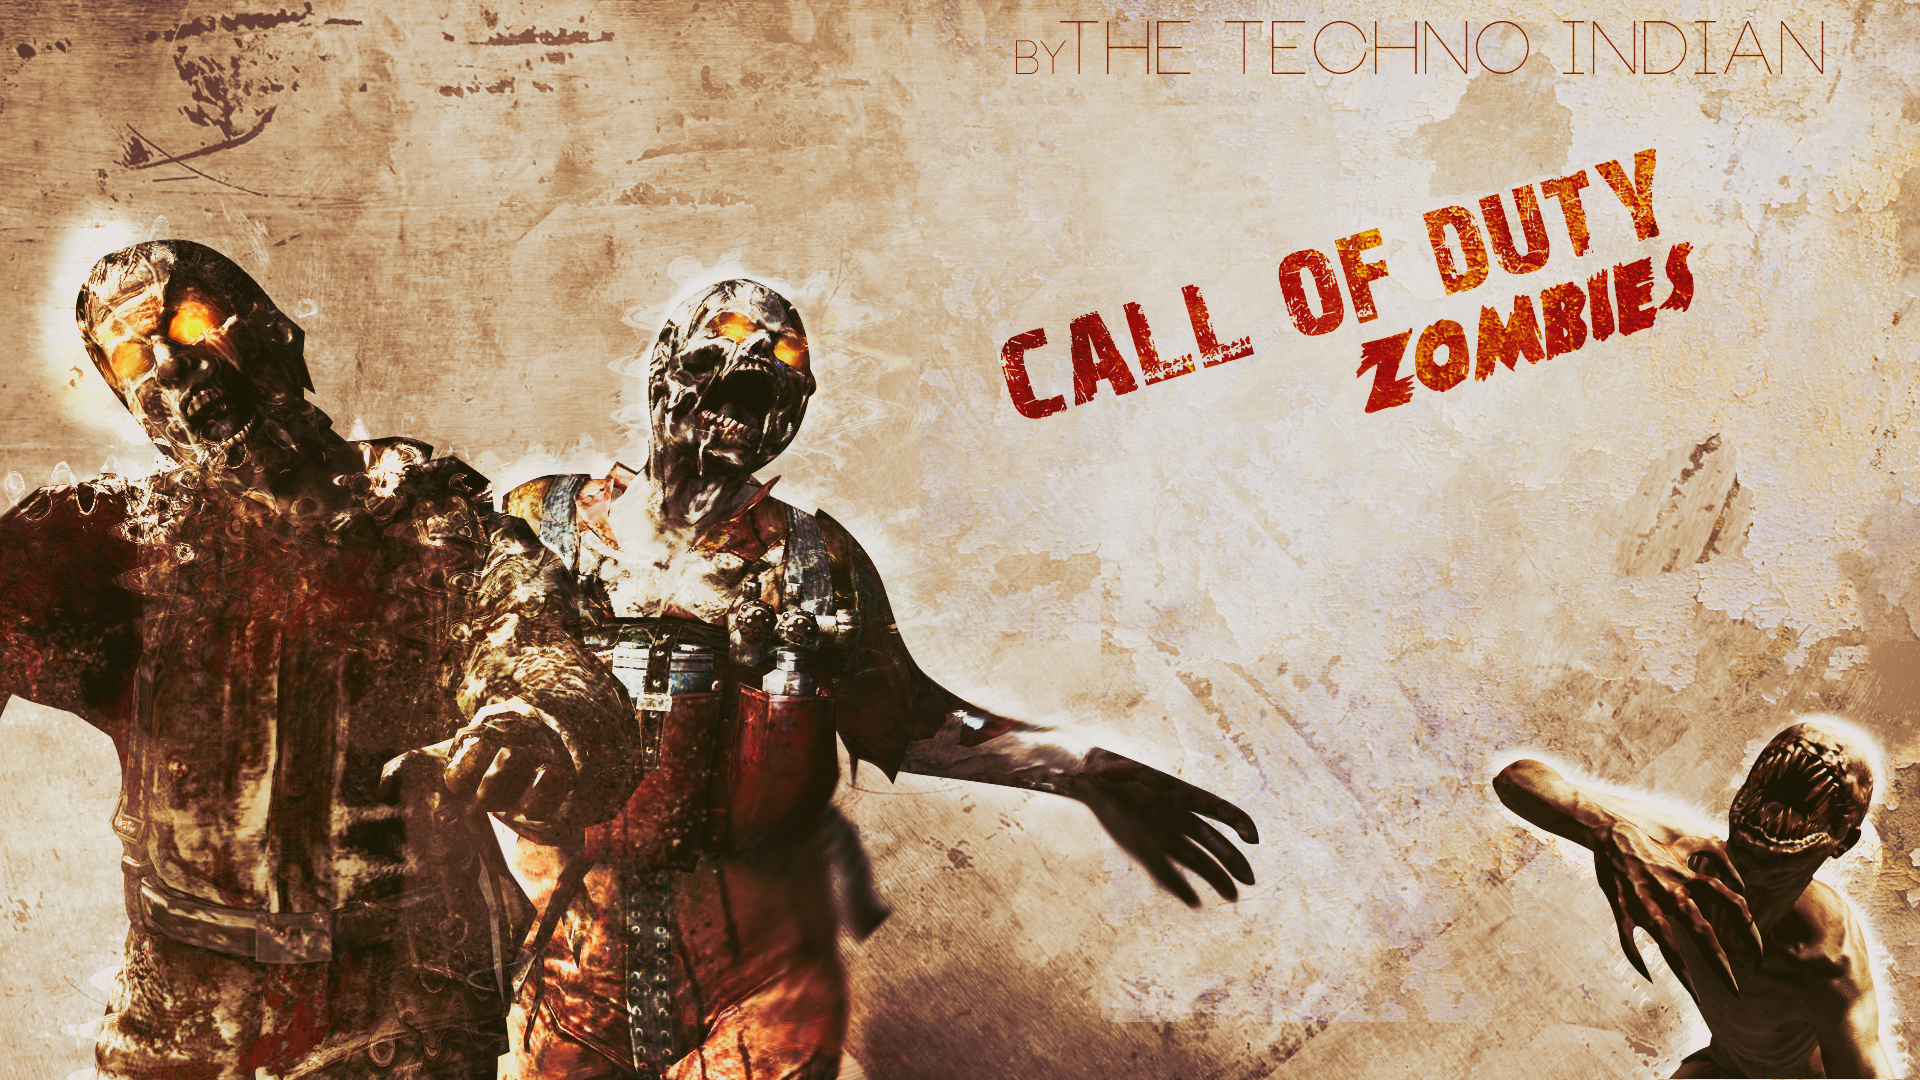 Call Of Duty Zombies Wallpaper by TheTechnoIndian on DeviantArt